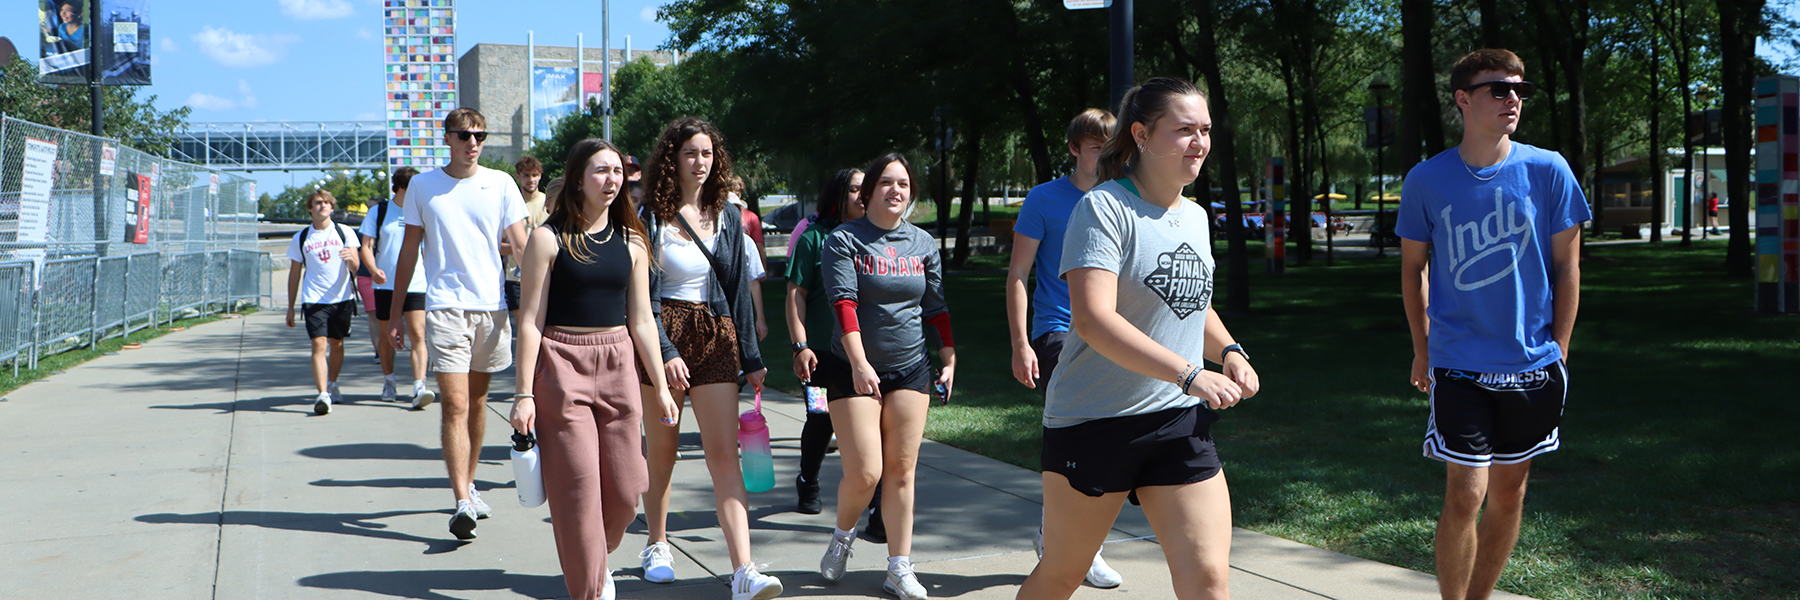 A group of students walking around Indianapolis